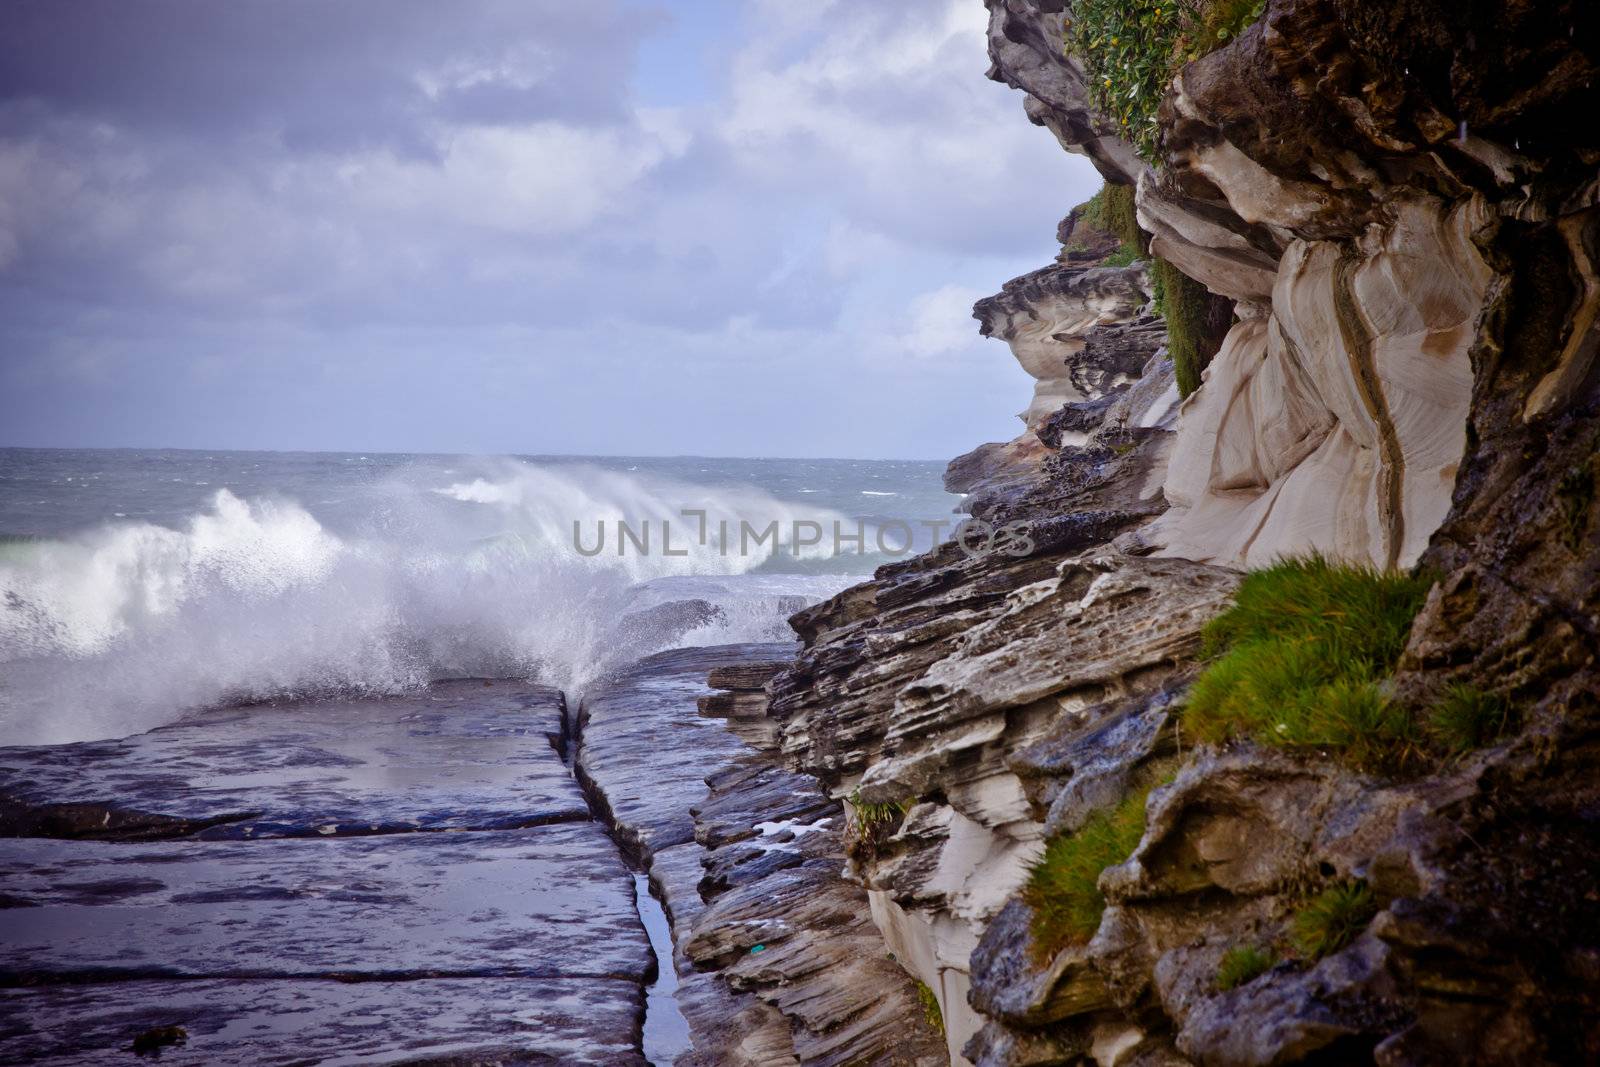 Waves breaking on a rocky ledge at the base of steep coastal cliffs